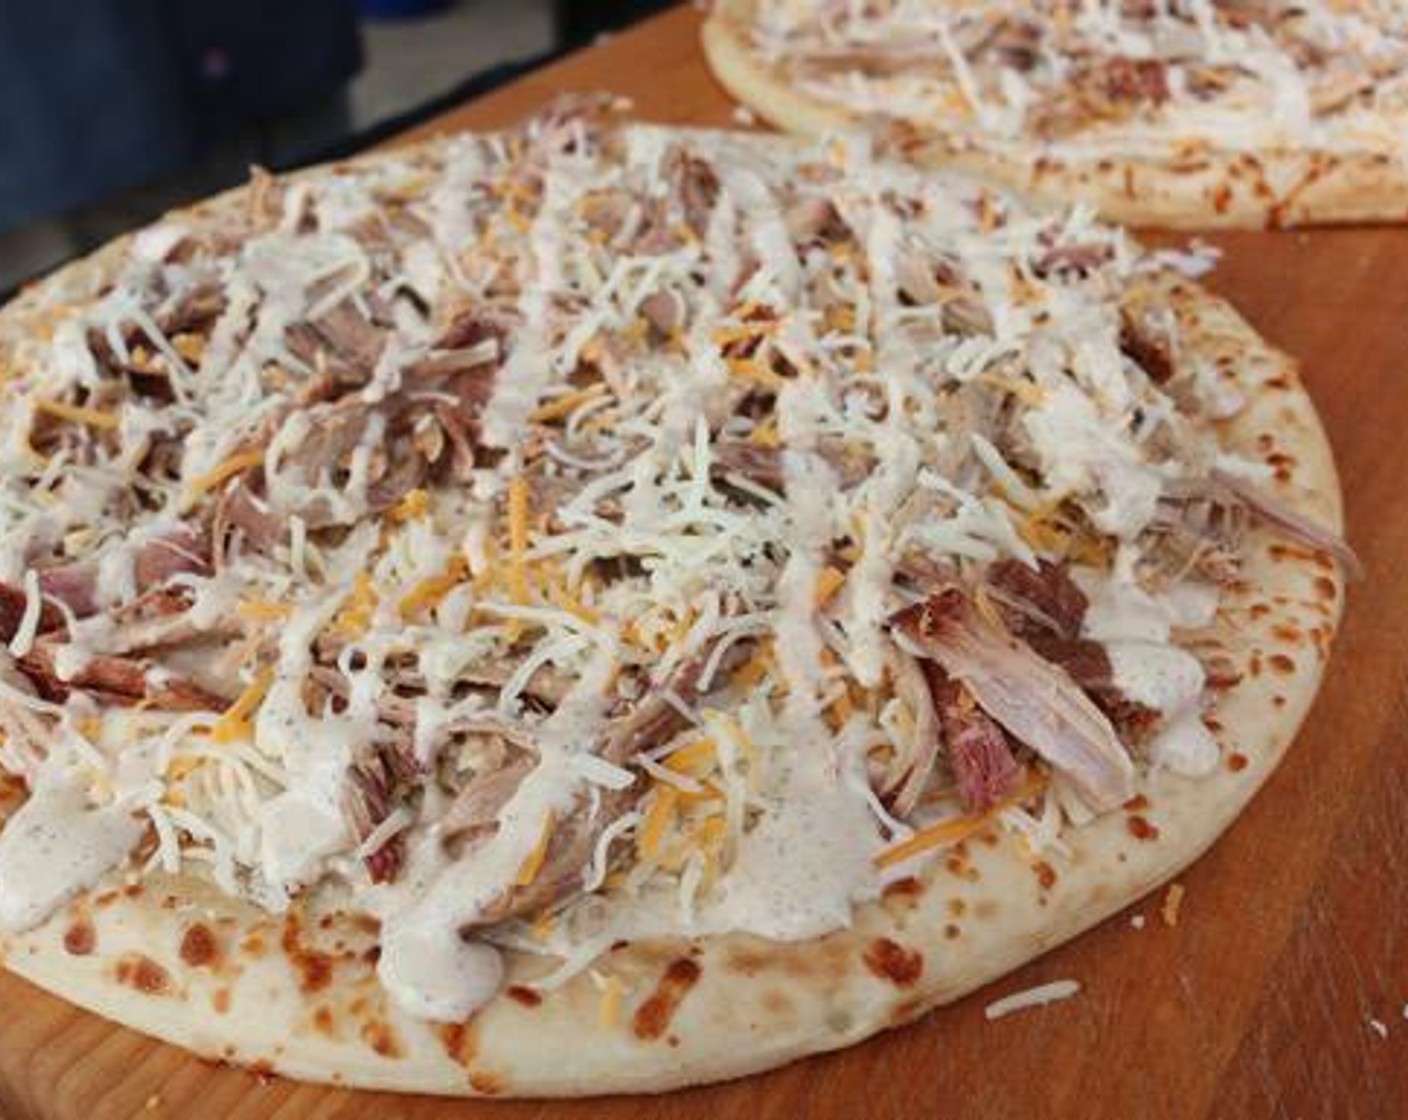 step 4 Top each crust with diced Onion (1), cheese blend, Pulled Pork (1 lb), more cheese, and a light drizzle of the white sauce.